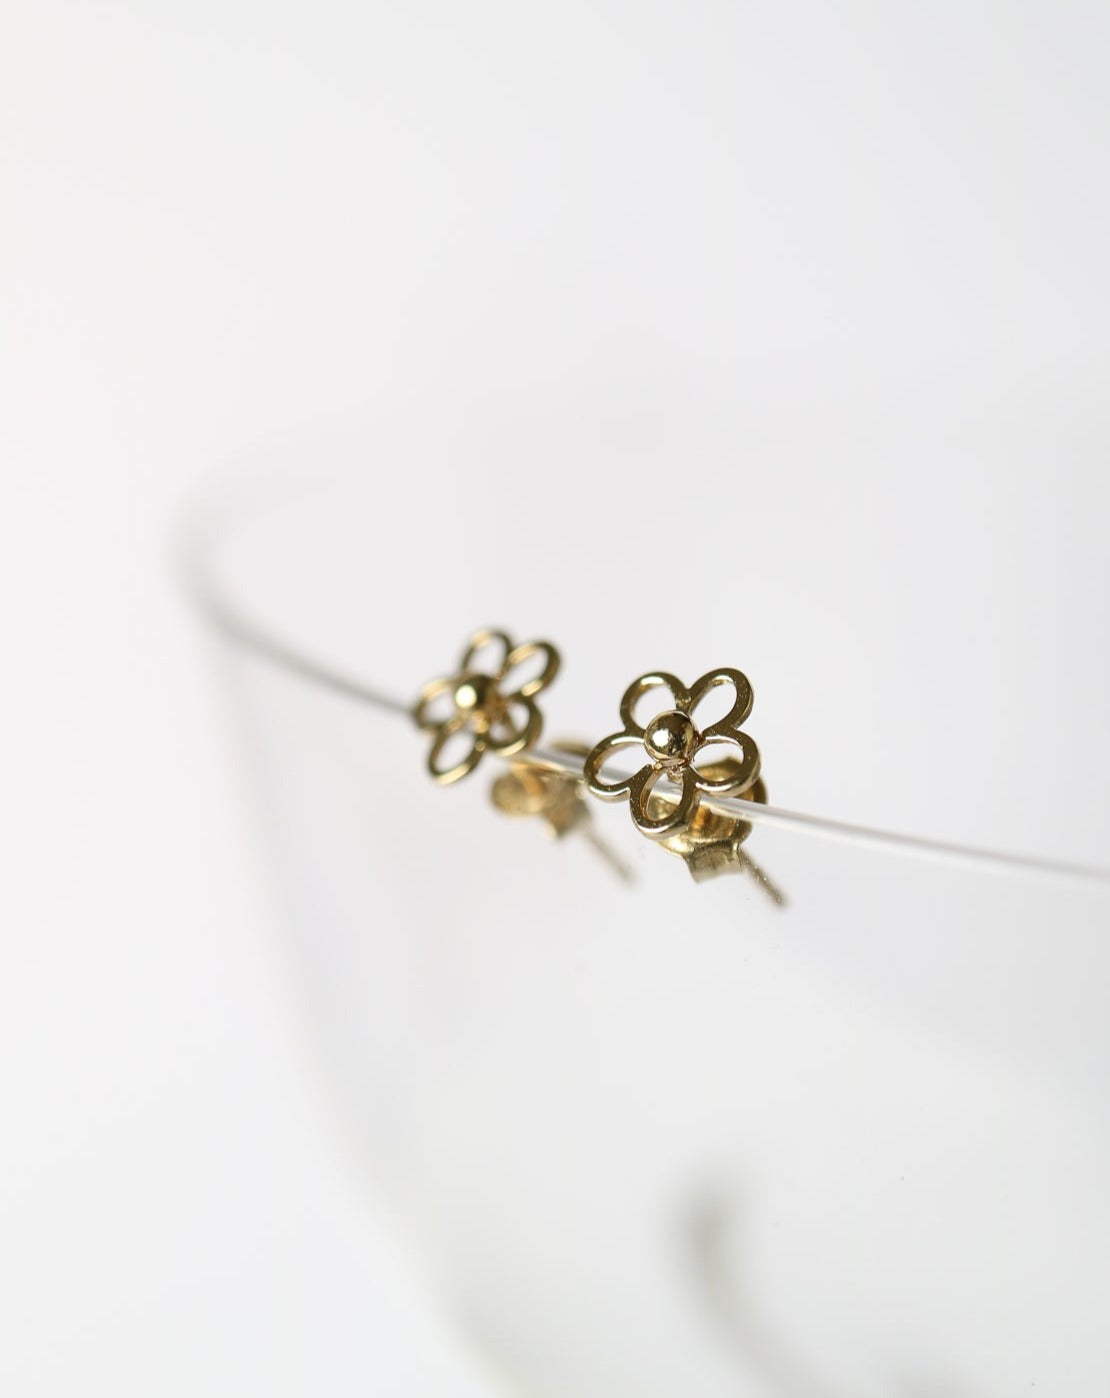 9kt gold Flower Studs by Collective & Co jewelry